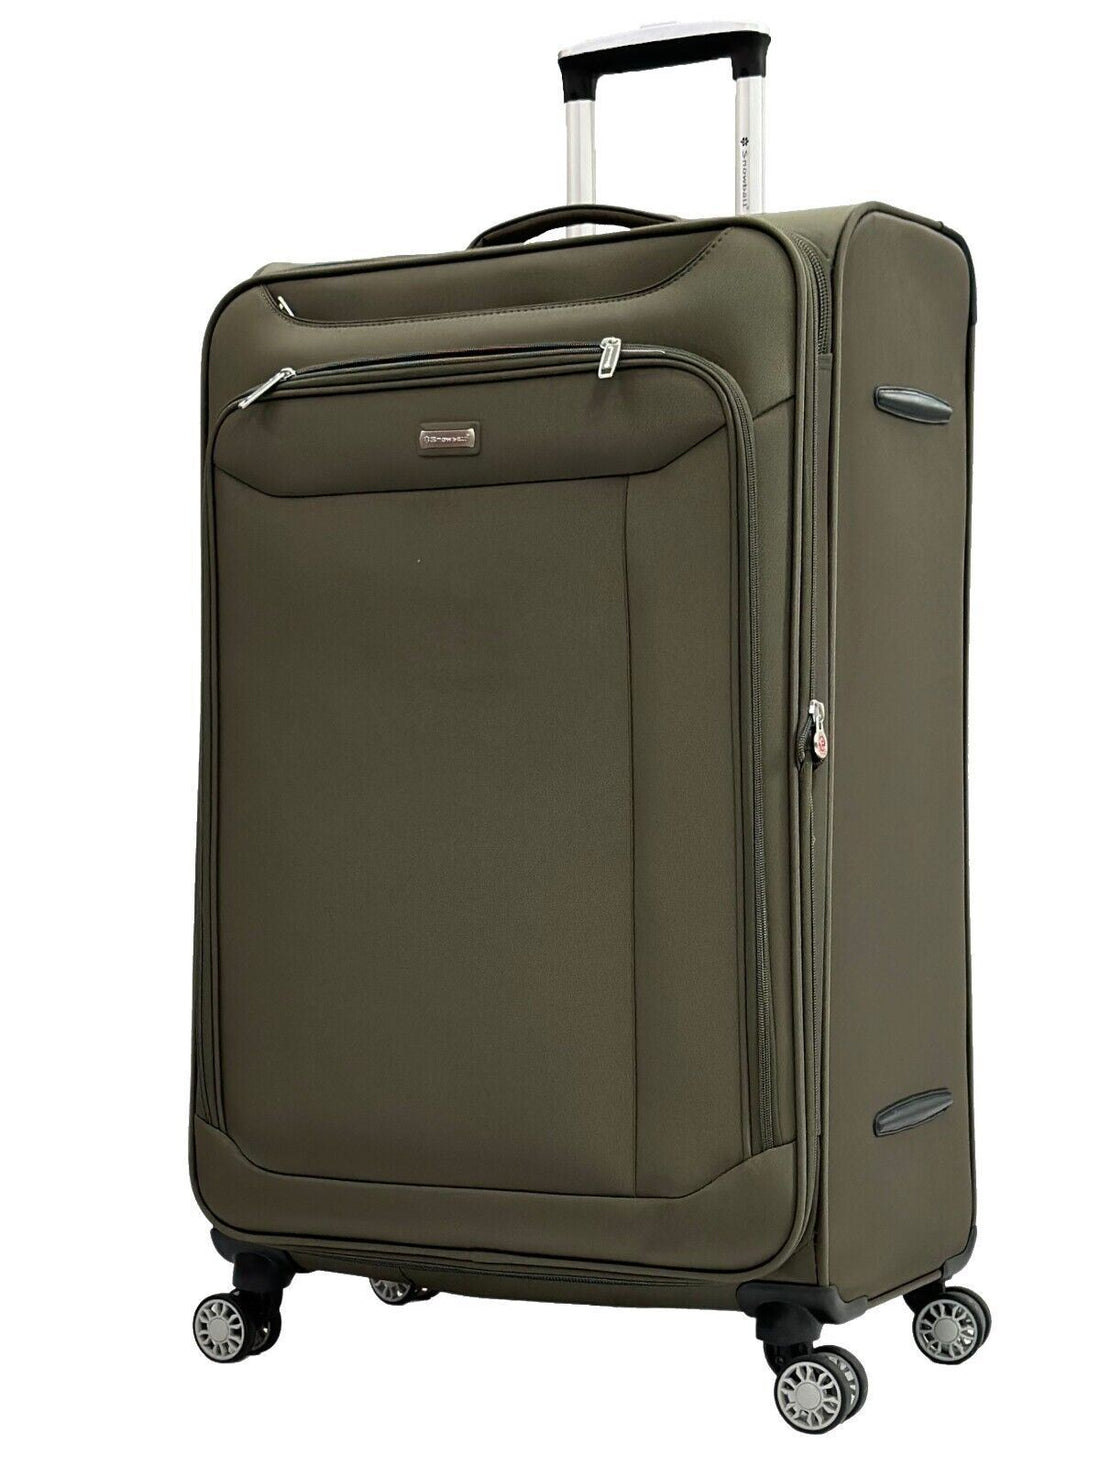 Centreville Large Soft Shell Suitcase in Khaki